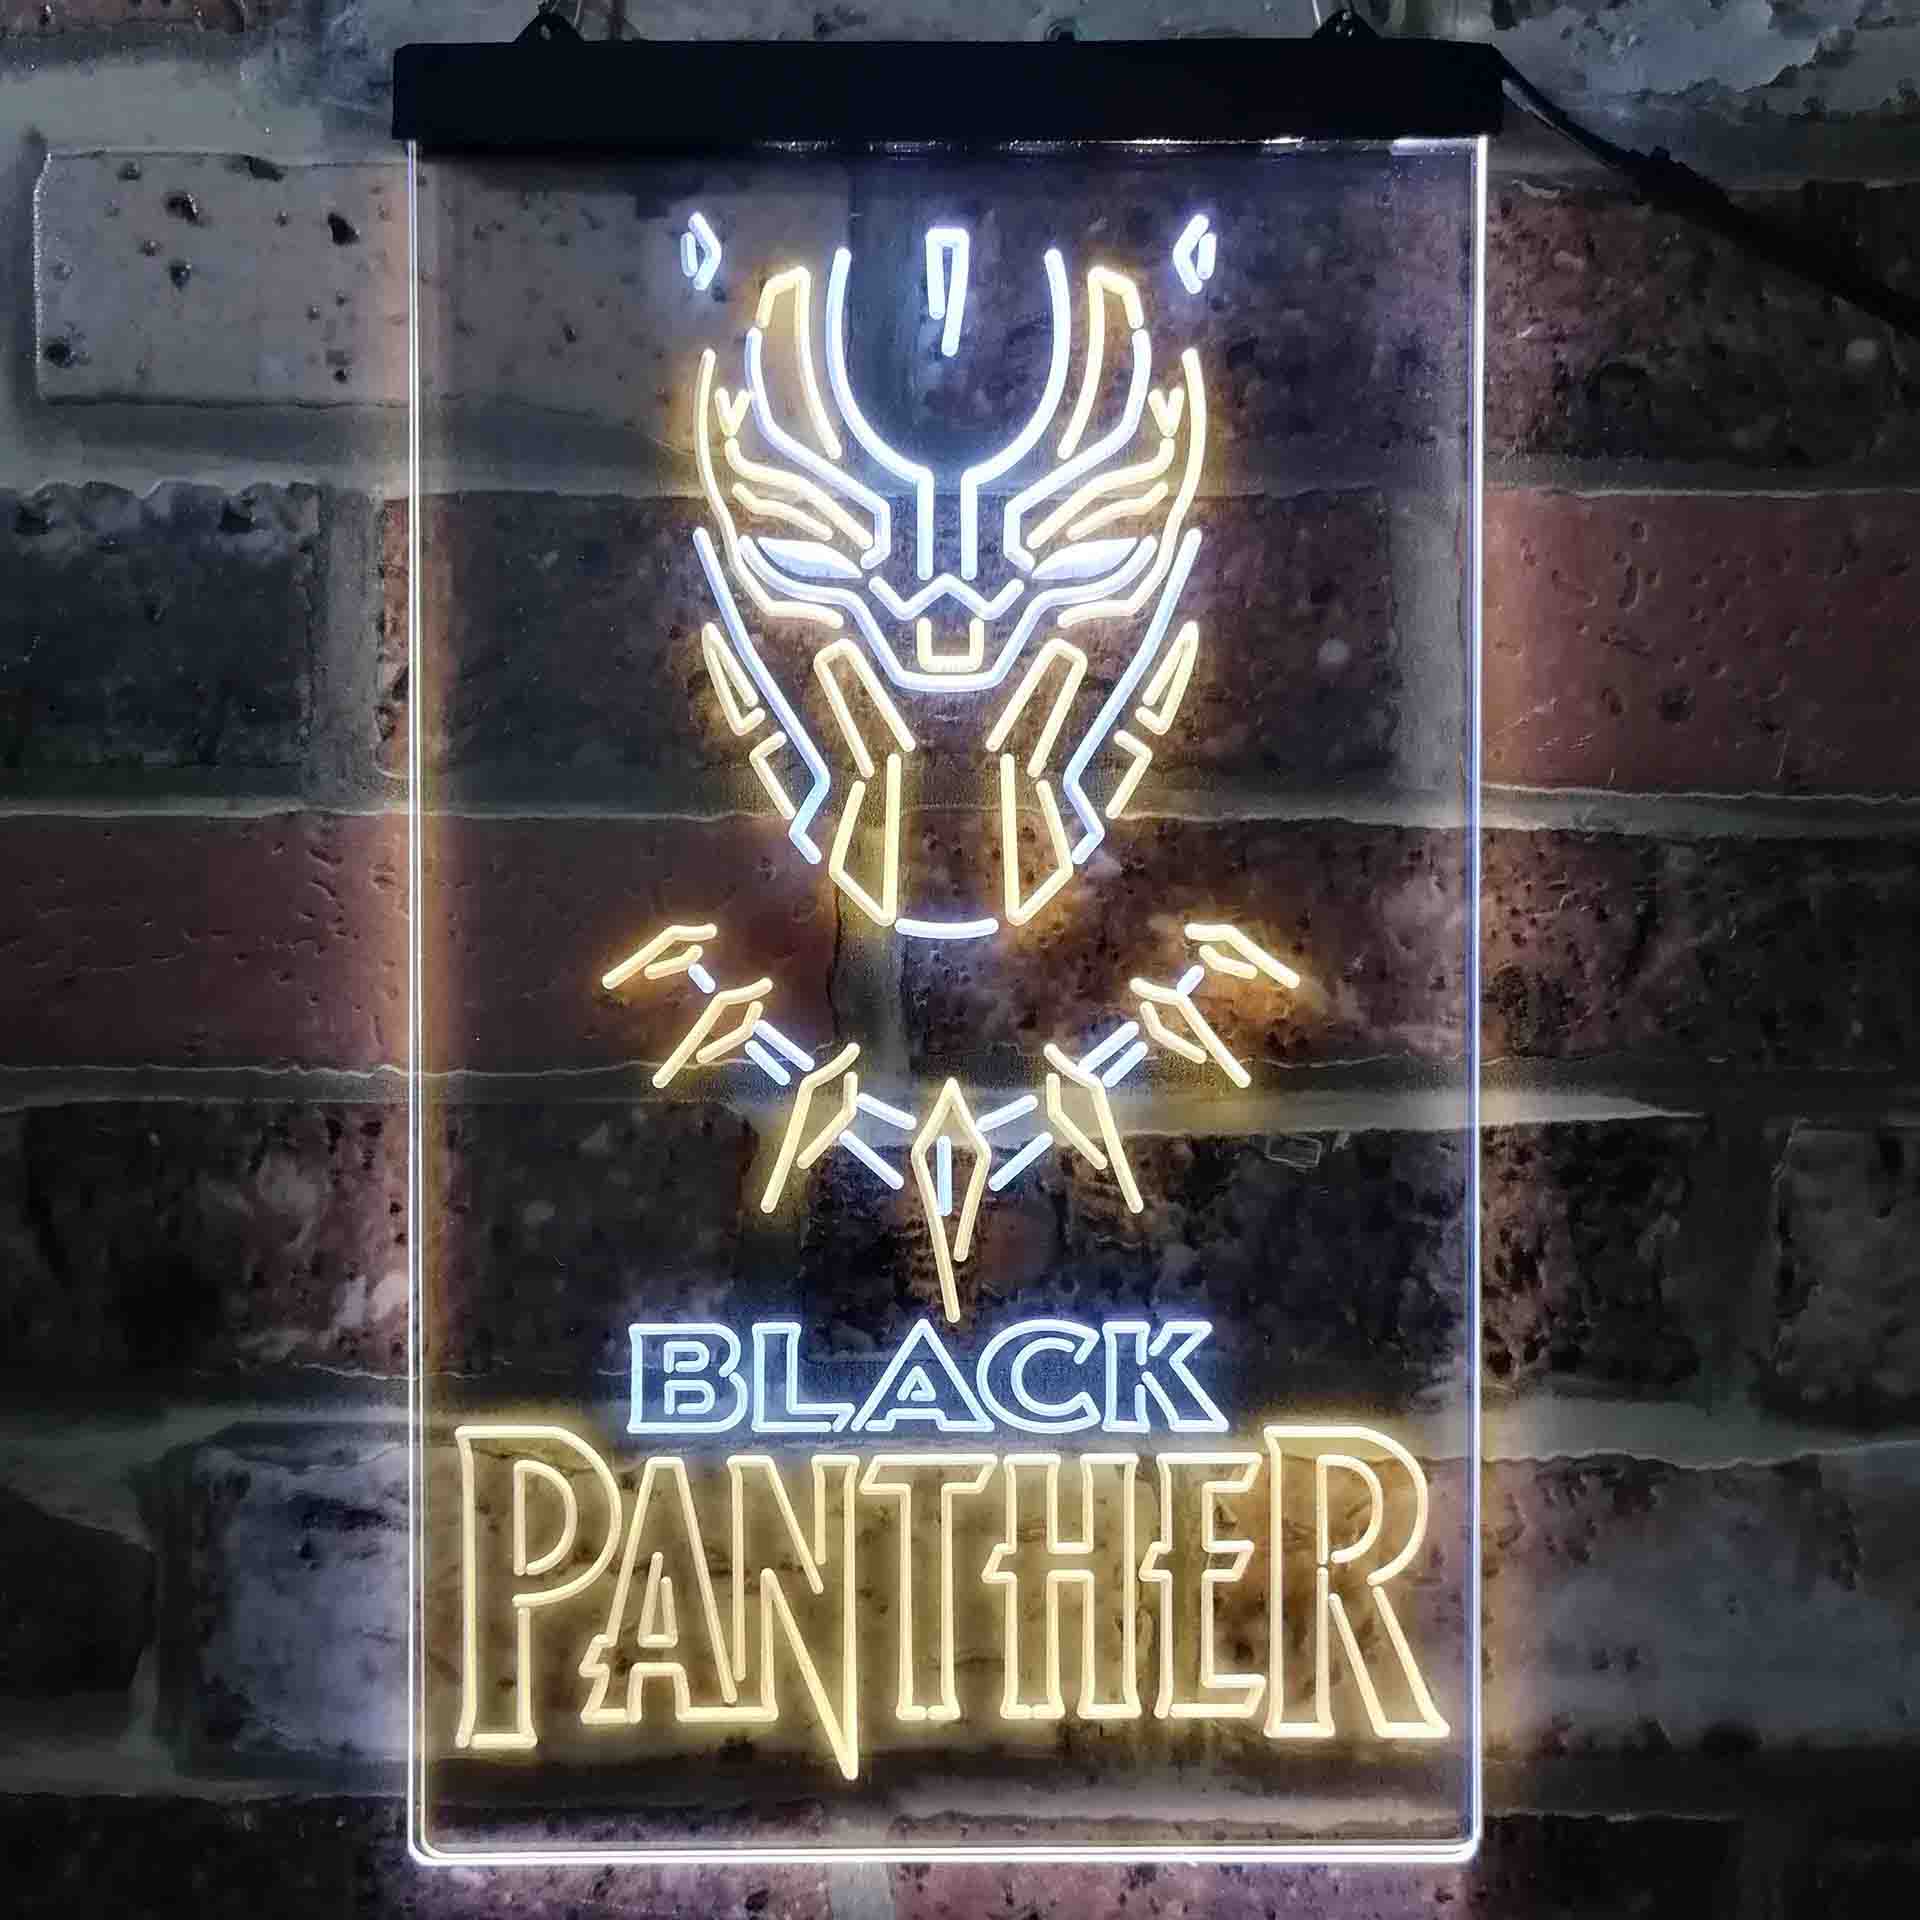 Black Panther Dual Color LED Neon Sign ProLedSign